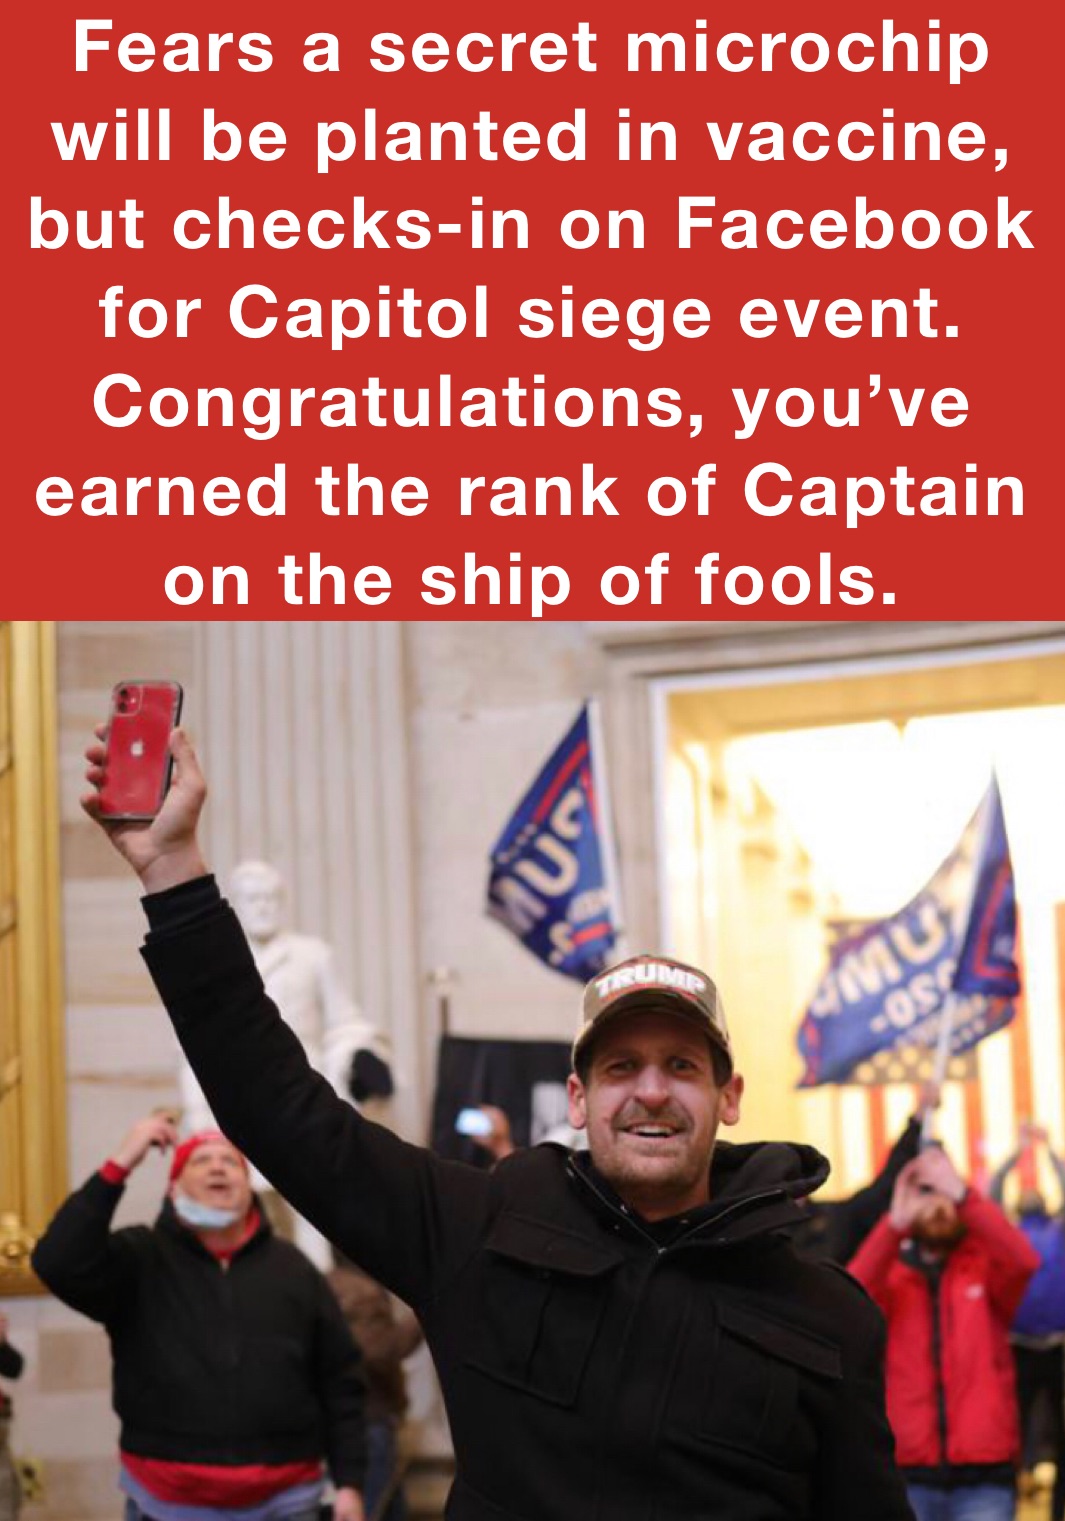 Fears a secret microchip will be planted in vaccine, but checks-in on Facebook for Capitol siege event.
Congratulations, you’ve earned the rank of Captain on the ship of fools.